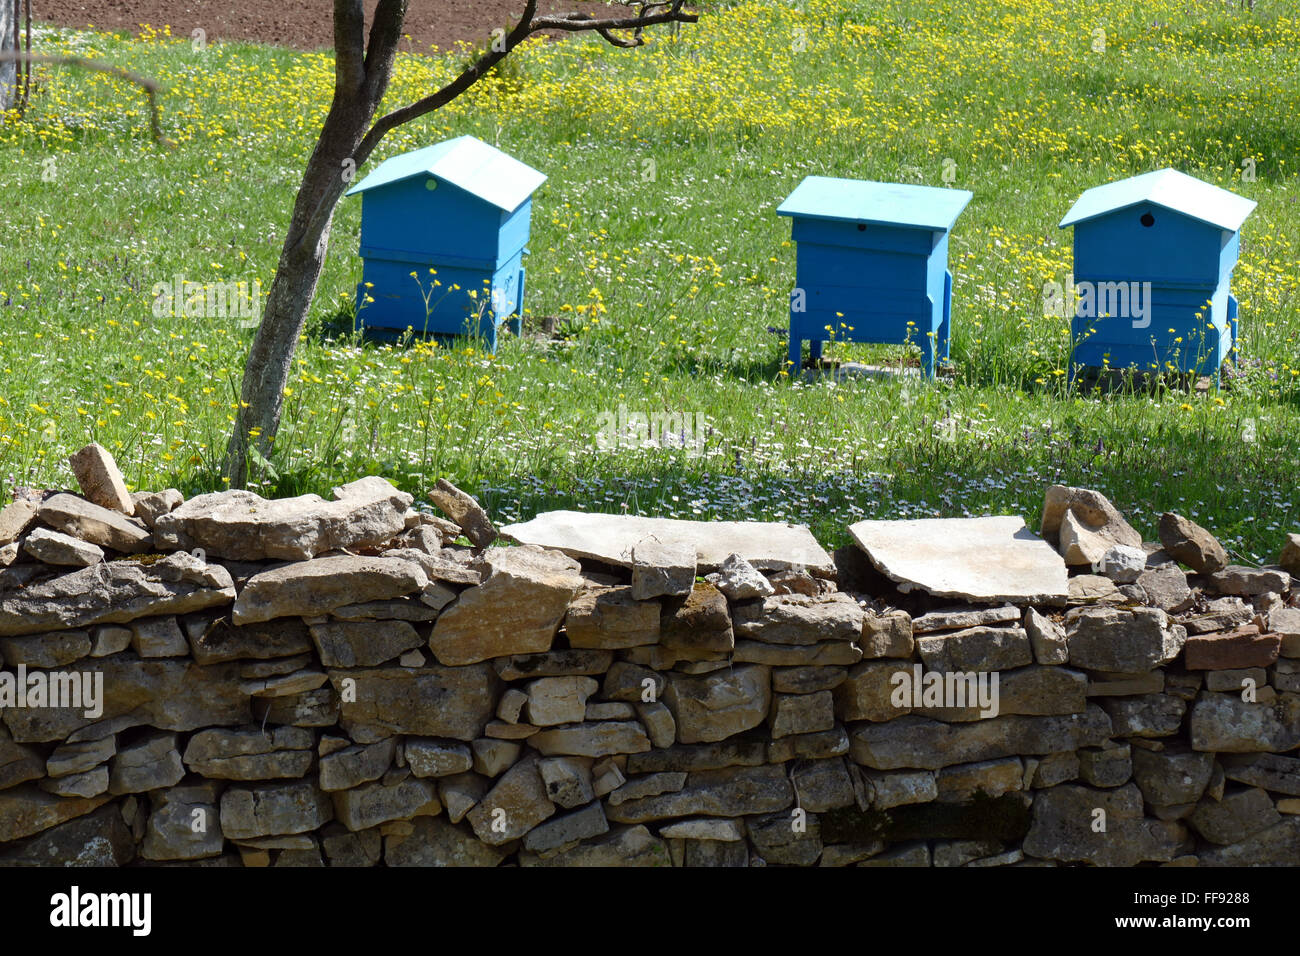 Spring garden with beehives. Stock Photo